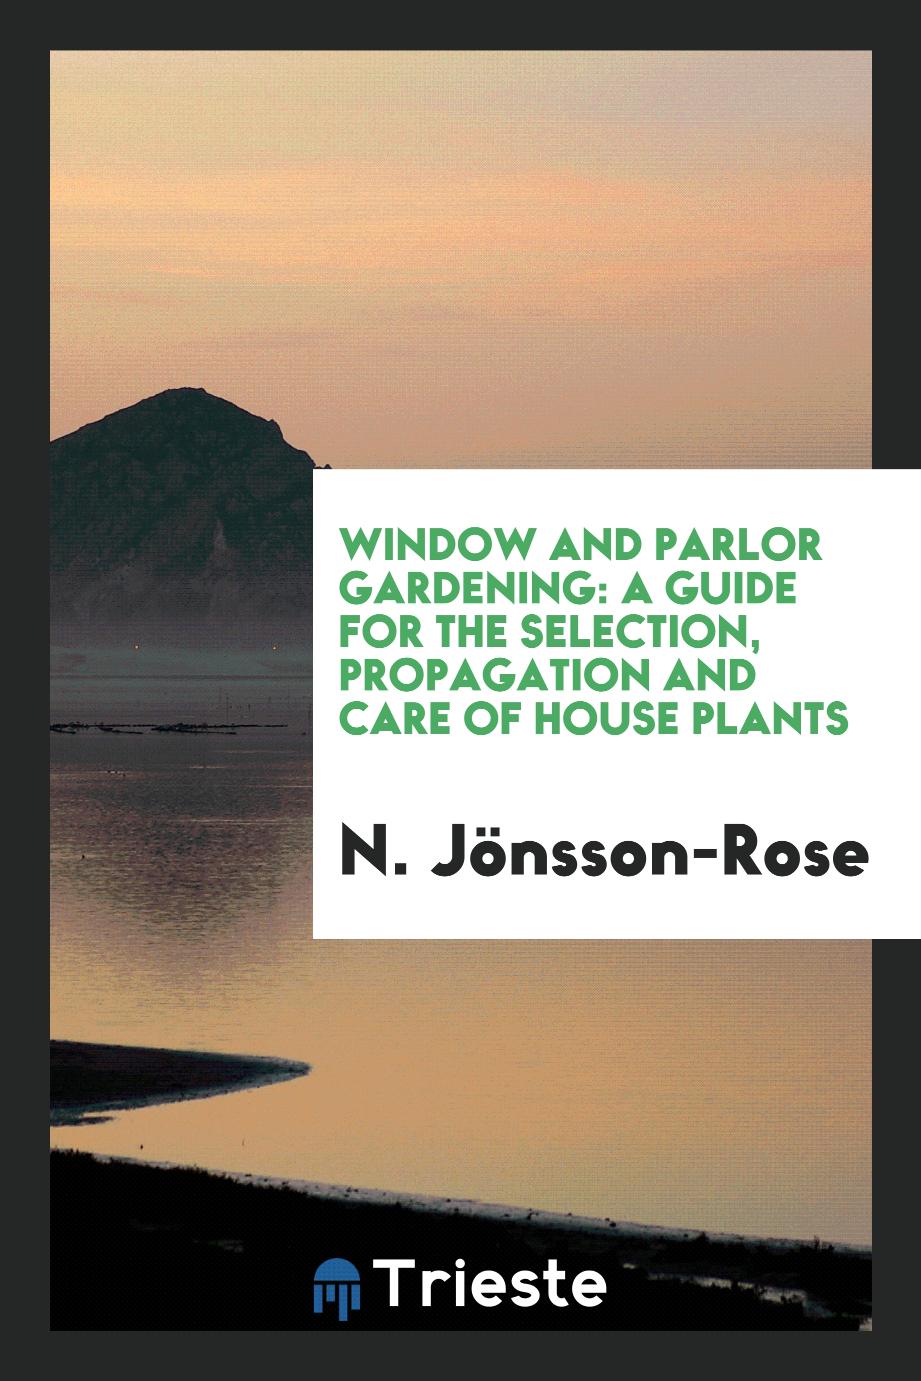 Window and Parlor Gardening: A Guide for the Selection, Propagation and Care of House Plants